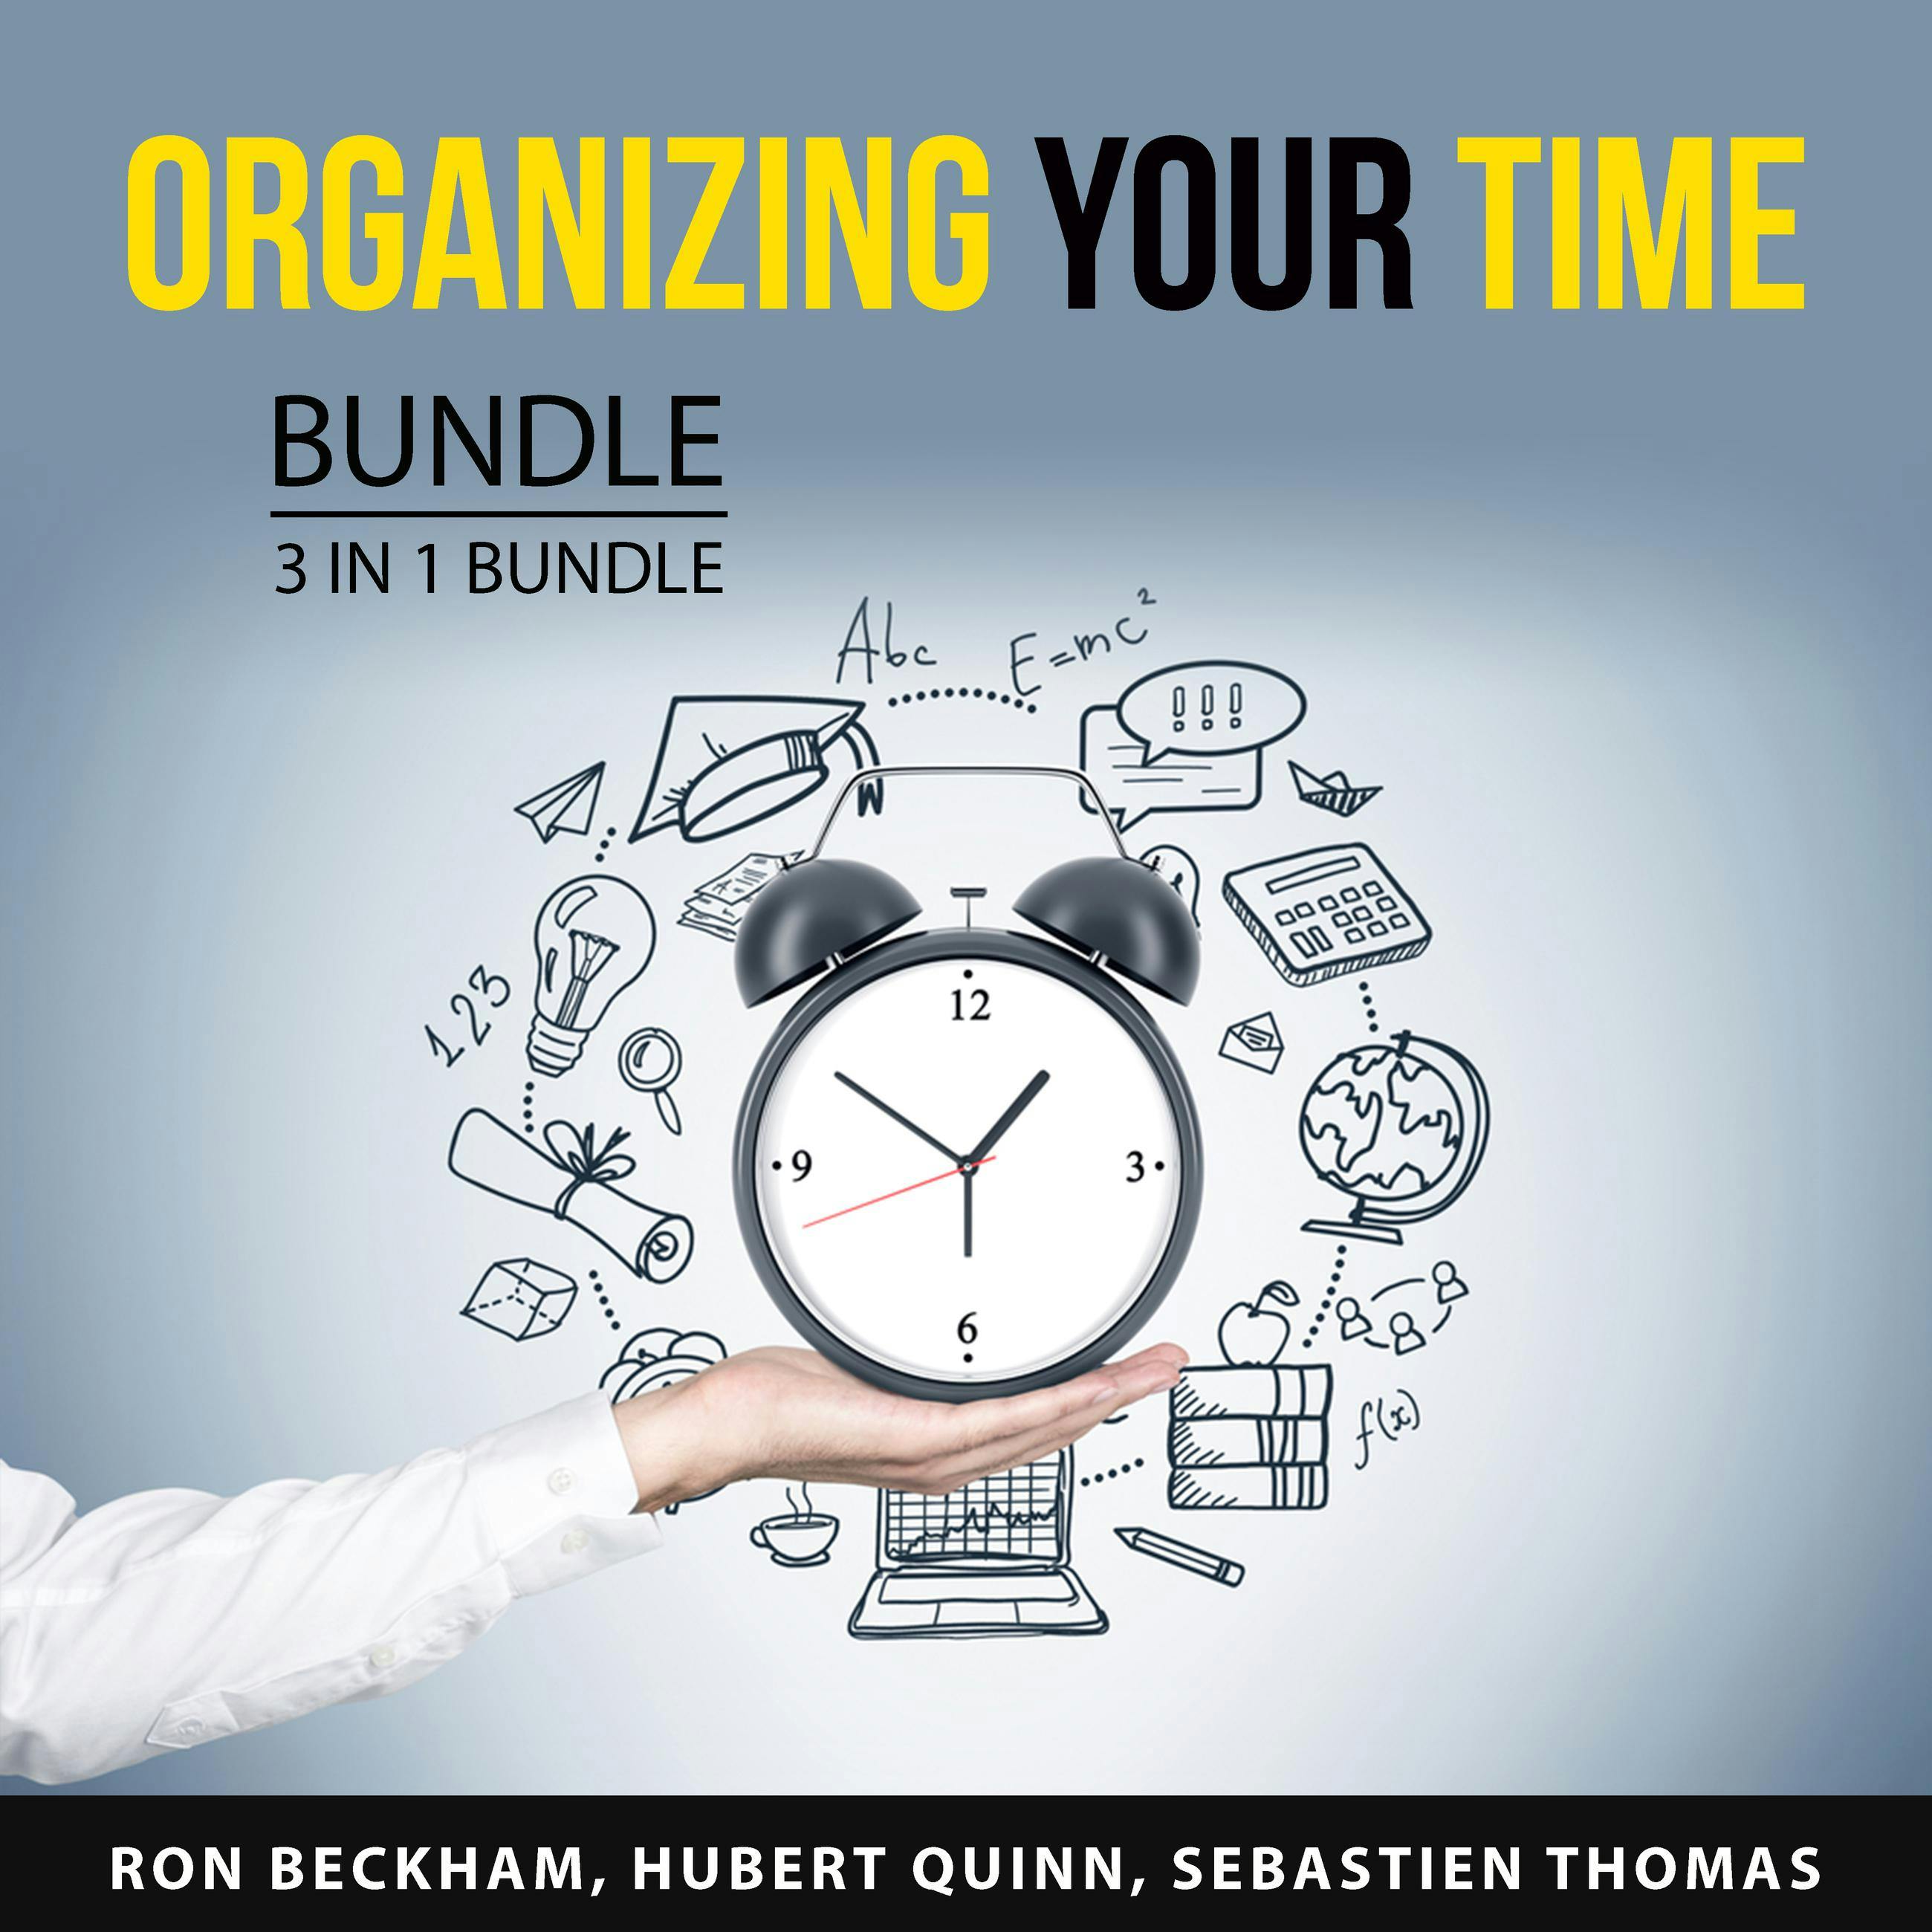 Organizing Your Time Bundle, 3 in 1 Bundle: Procrastination Fix, Productivity Habits, and Make the Most of Your Time - undefined